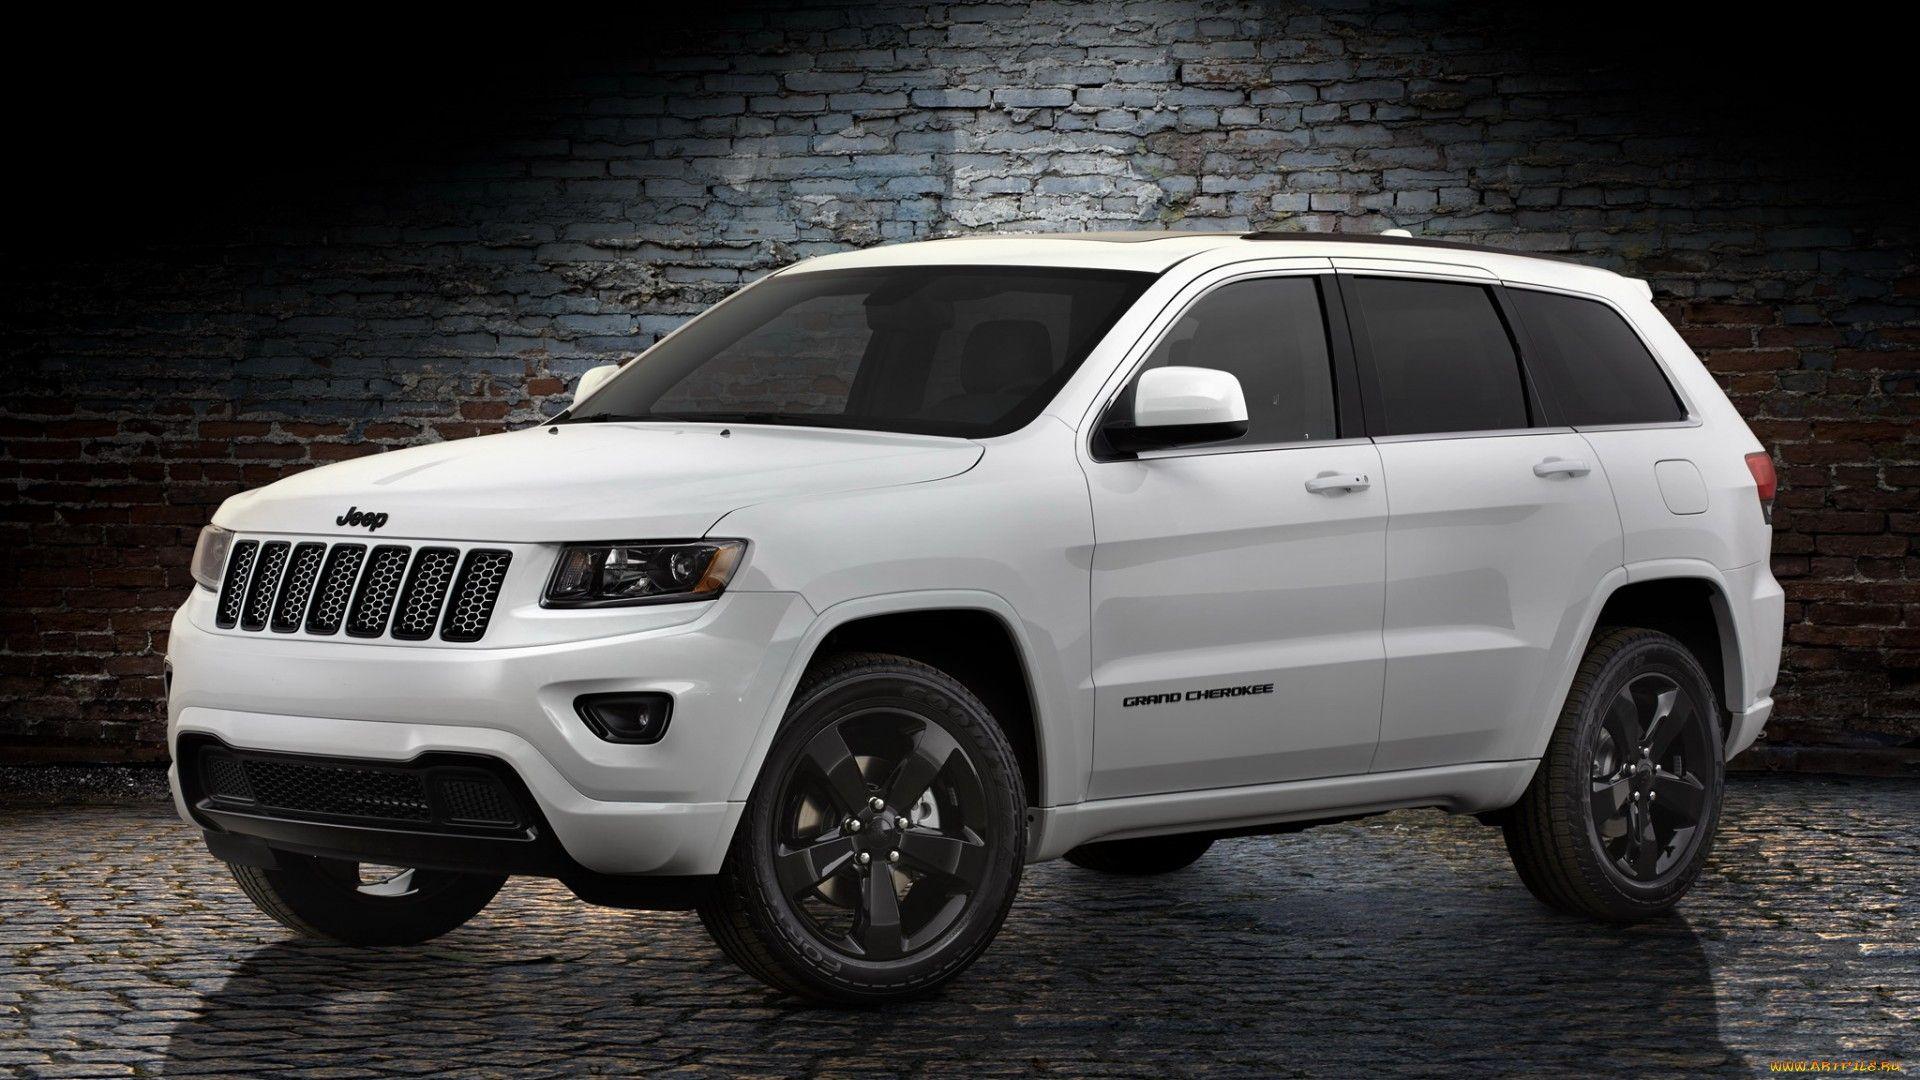 Wallpapers of Jeep Grand Cherokee